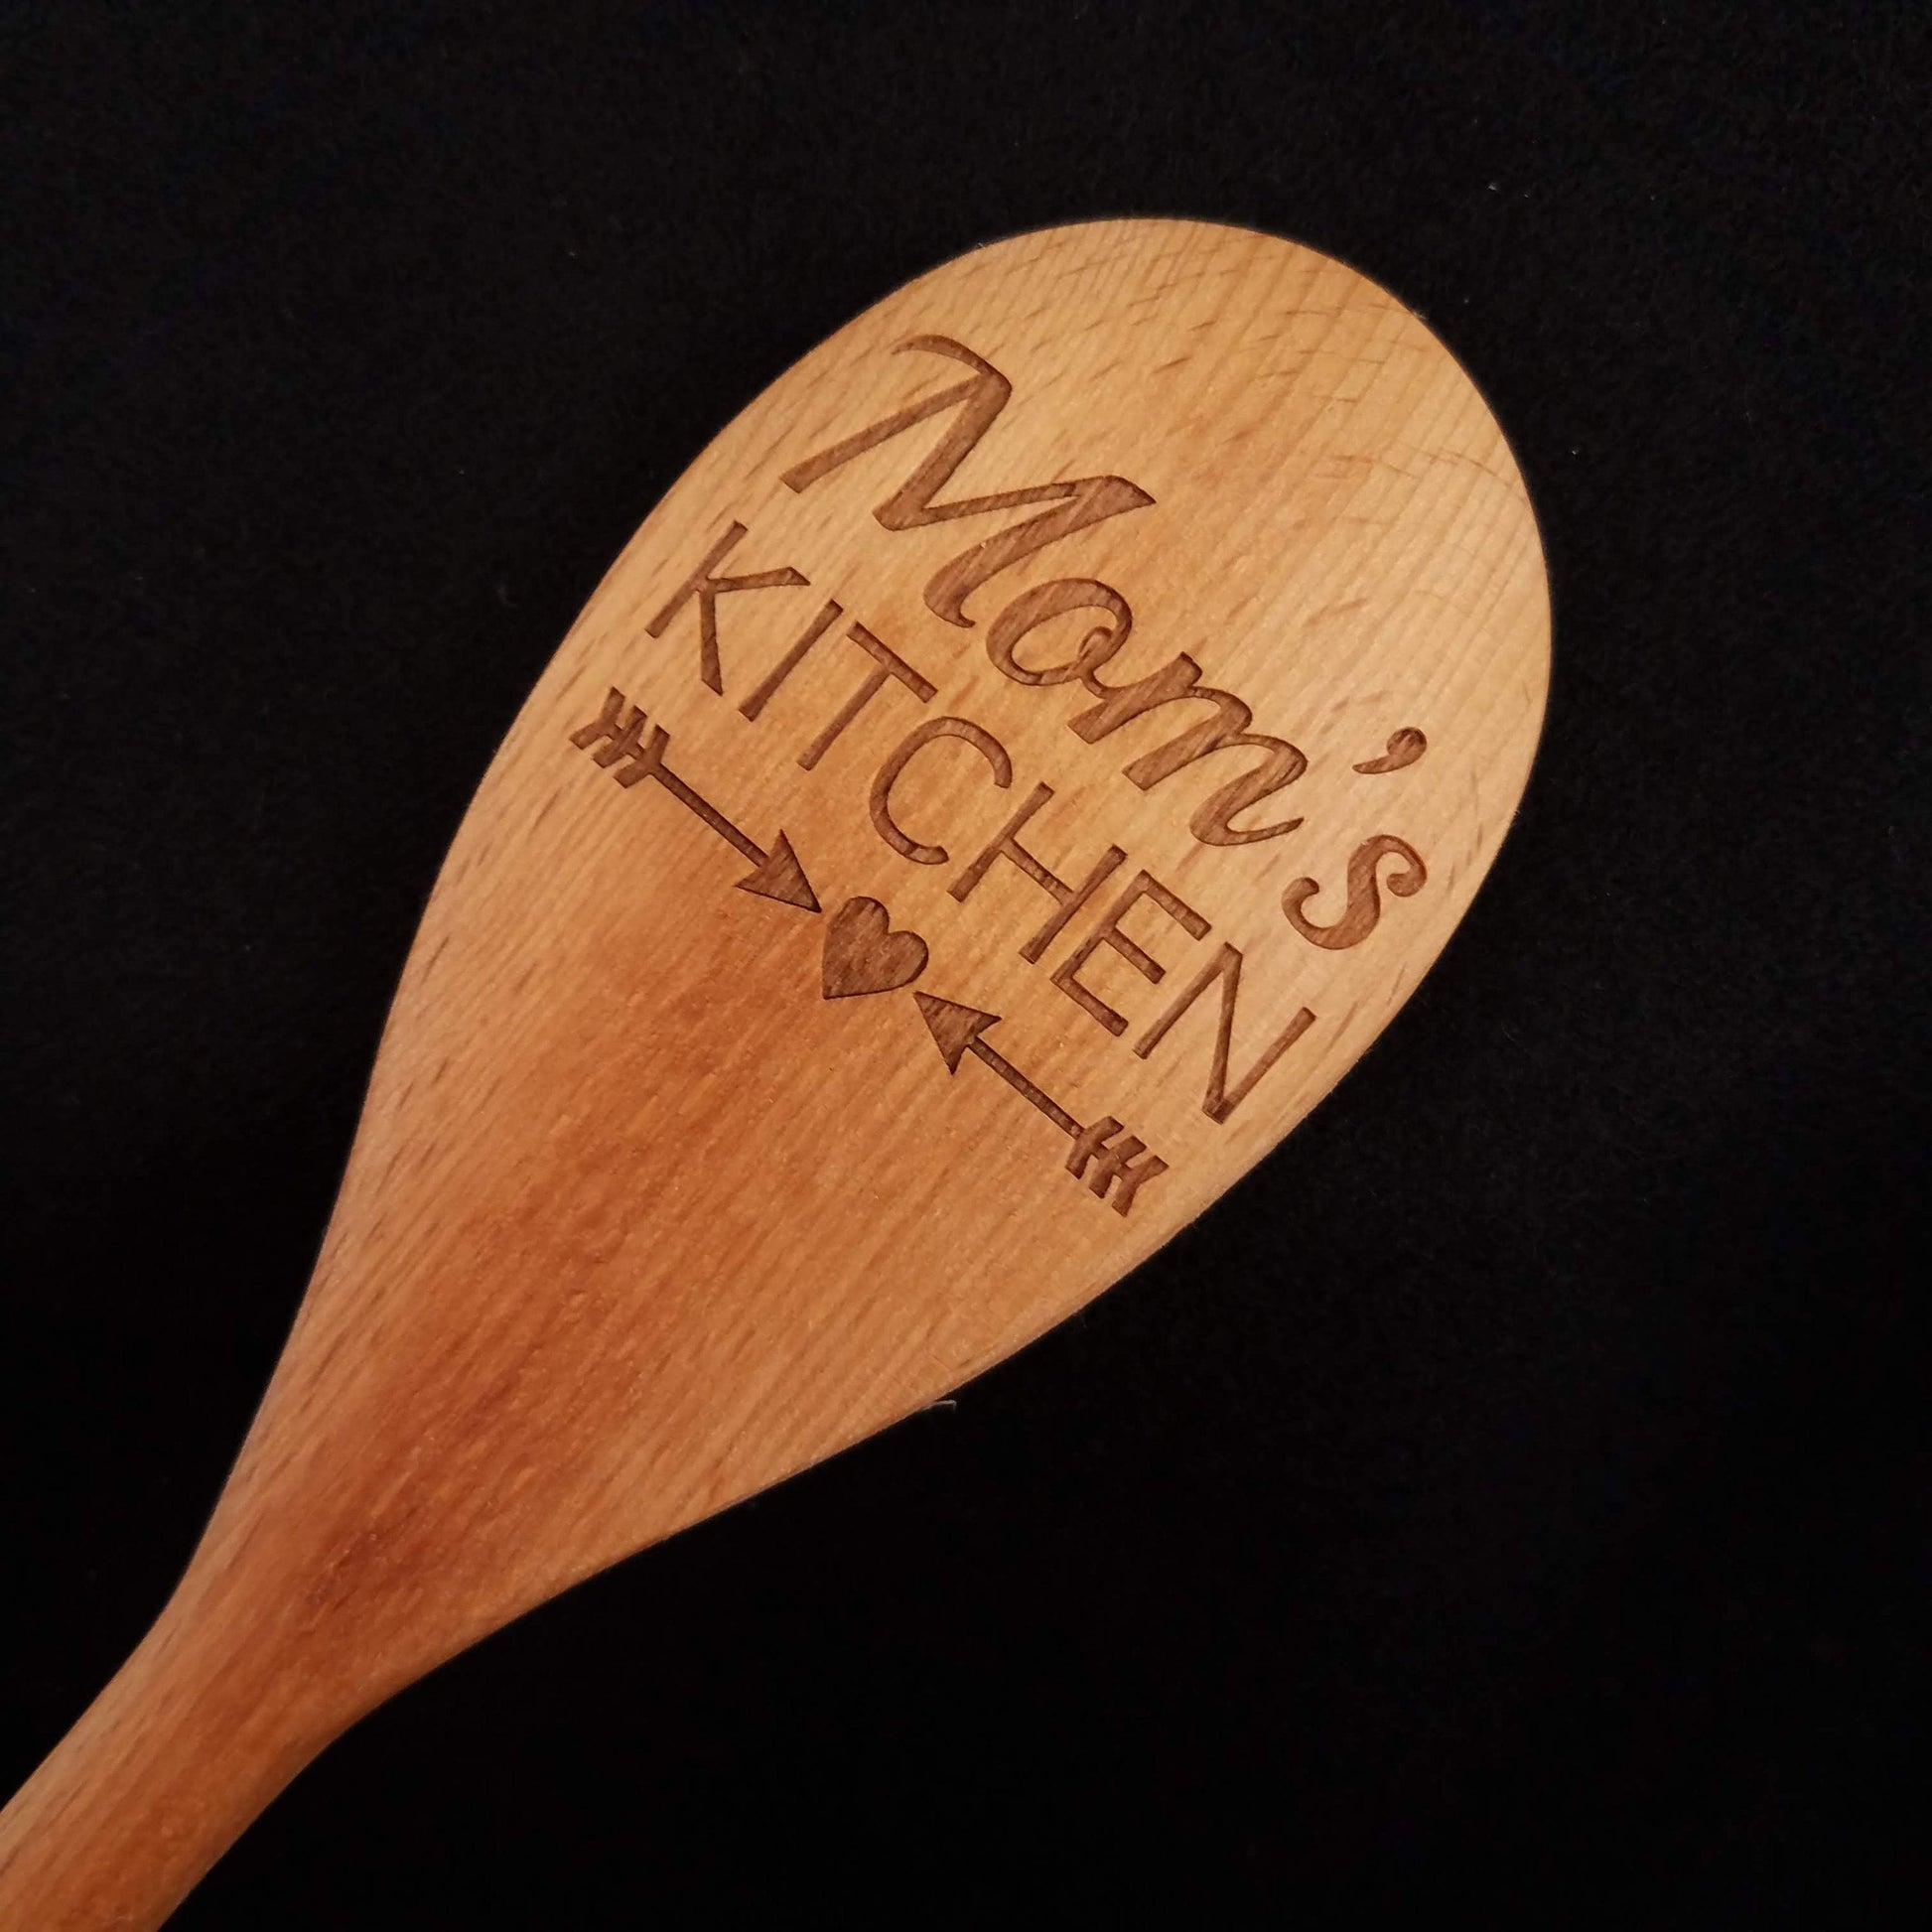 Customizable beech wood spoon laser engraved with Mom's Kitchen and a heart and arrow design